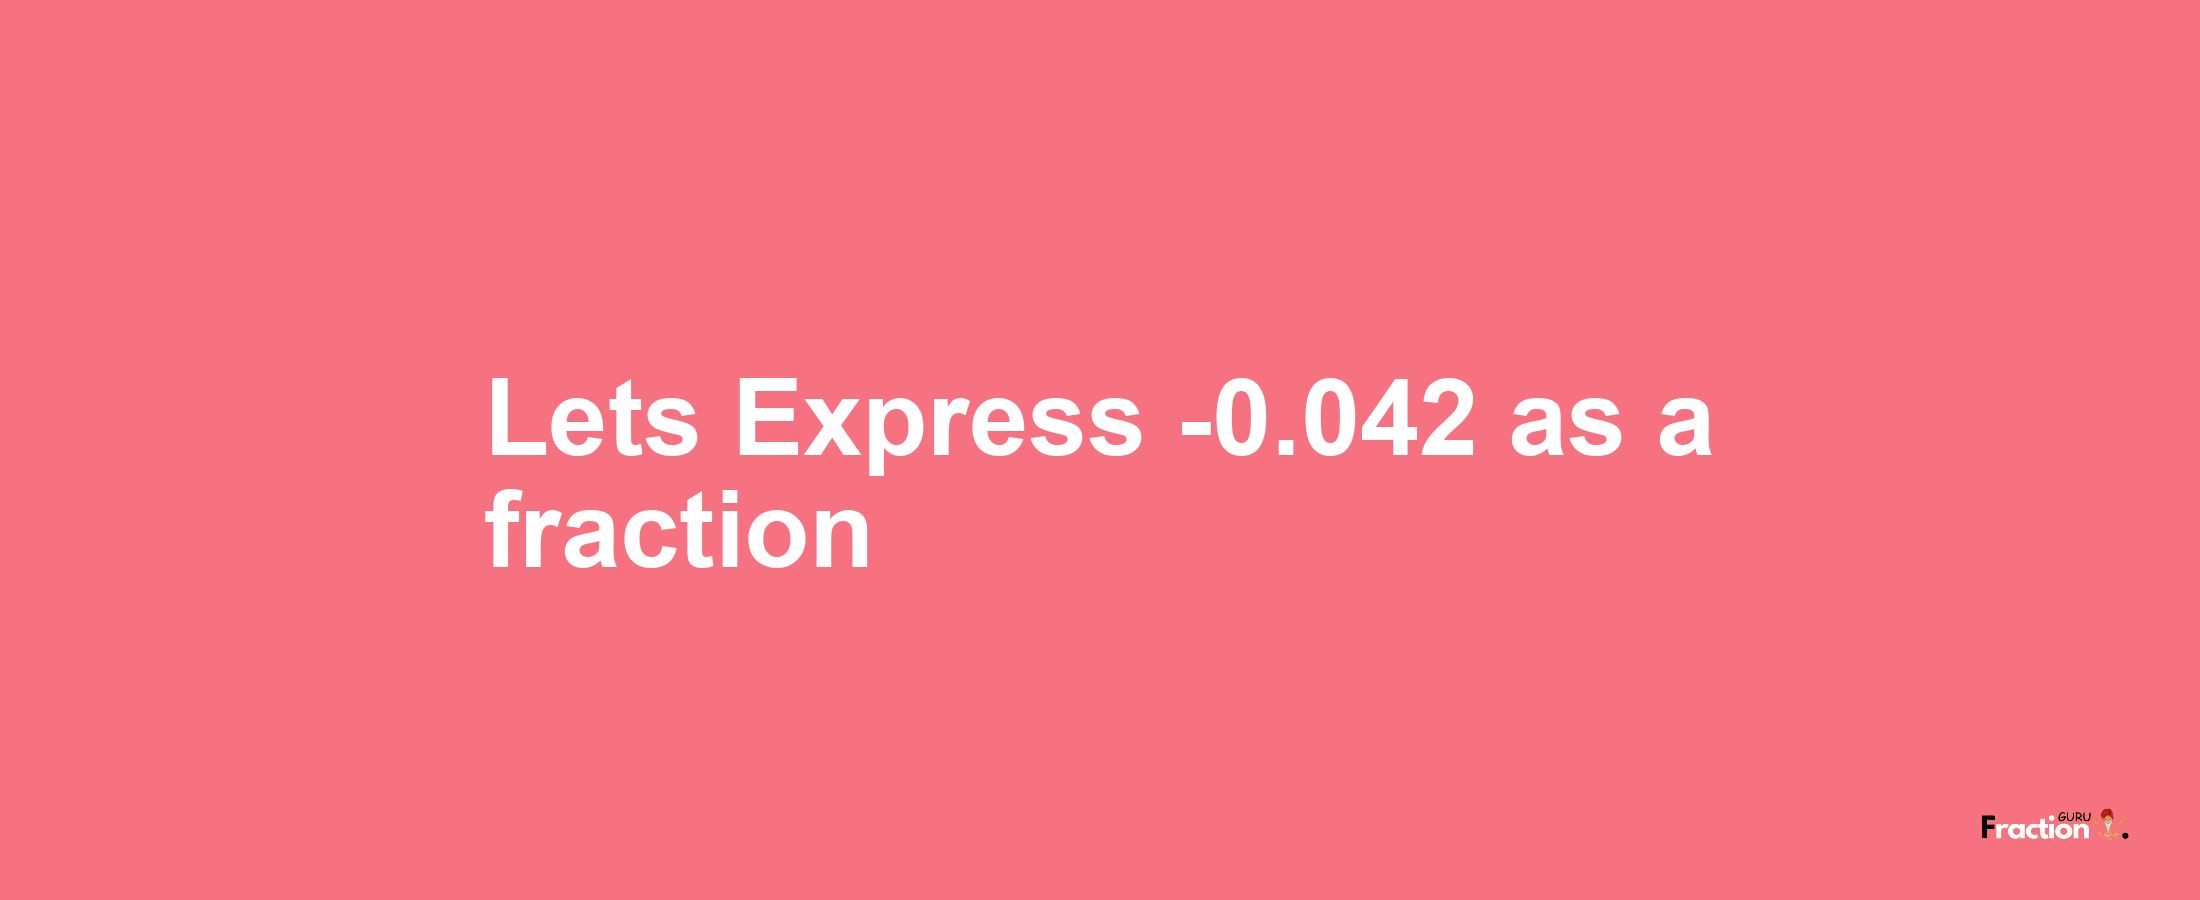 Lets Express -0.042 as afraction